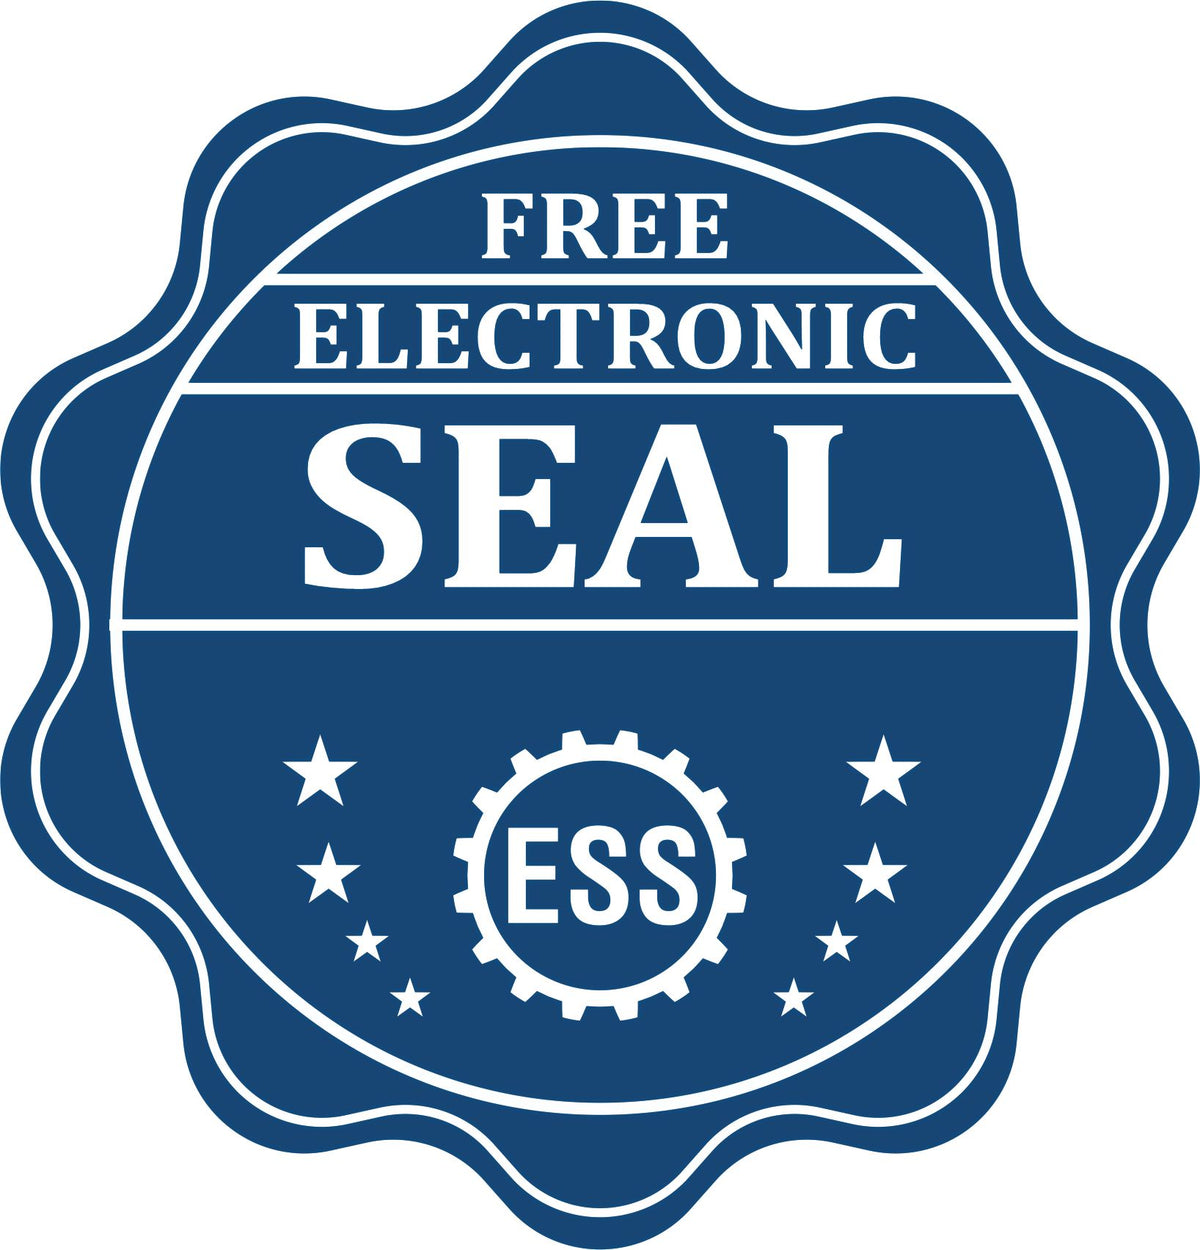 A badge showing a free electronic seal for the Hybrid District of Columbia Land Surveyor Seal with stars and the ESS gear on the emblem.